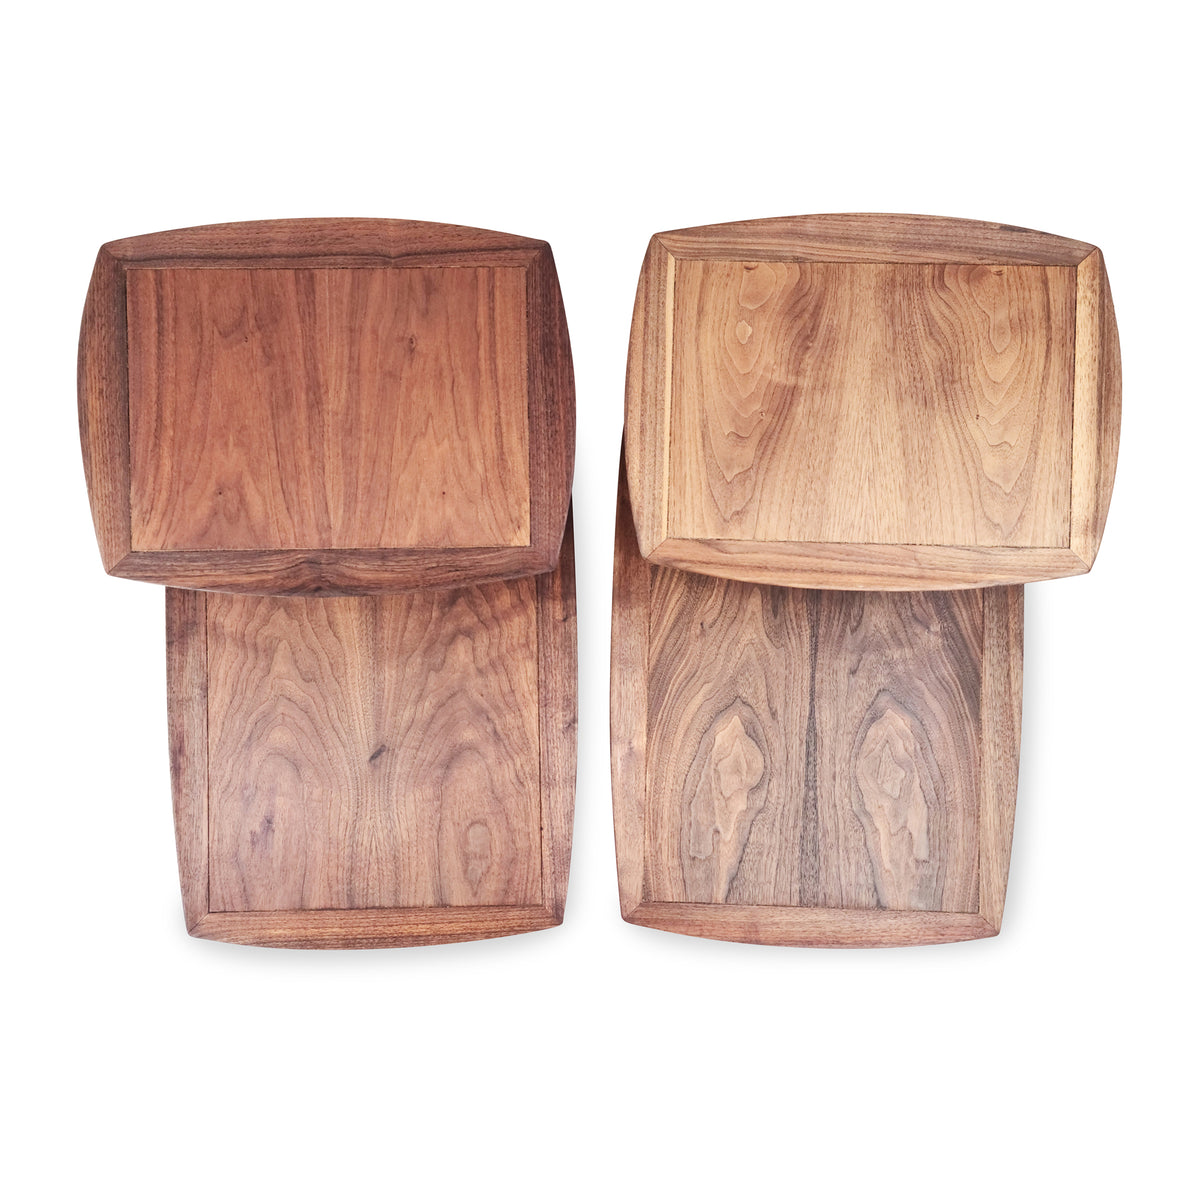 Walnut Two Tier End Tables by Deilcraft